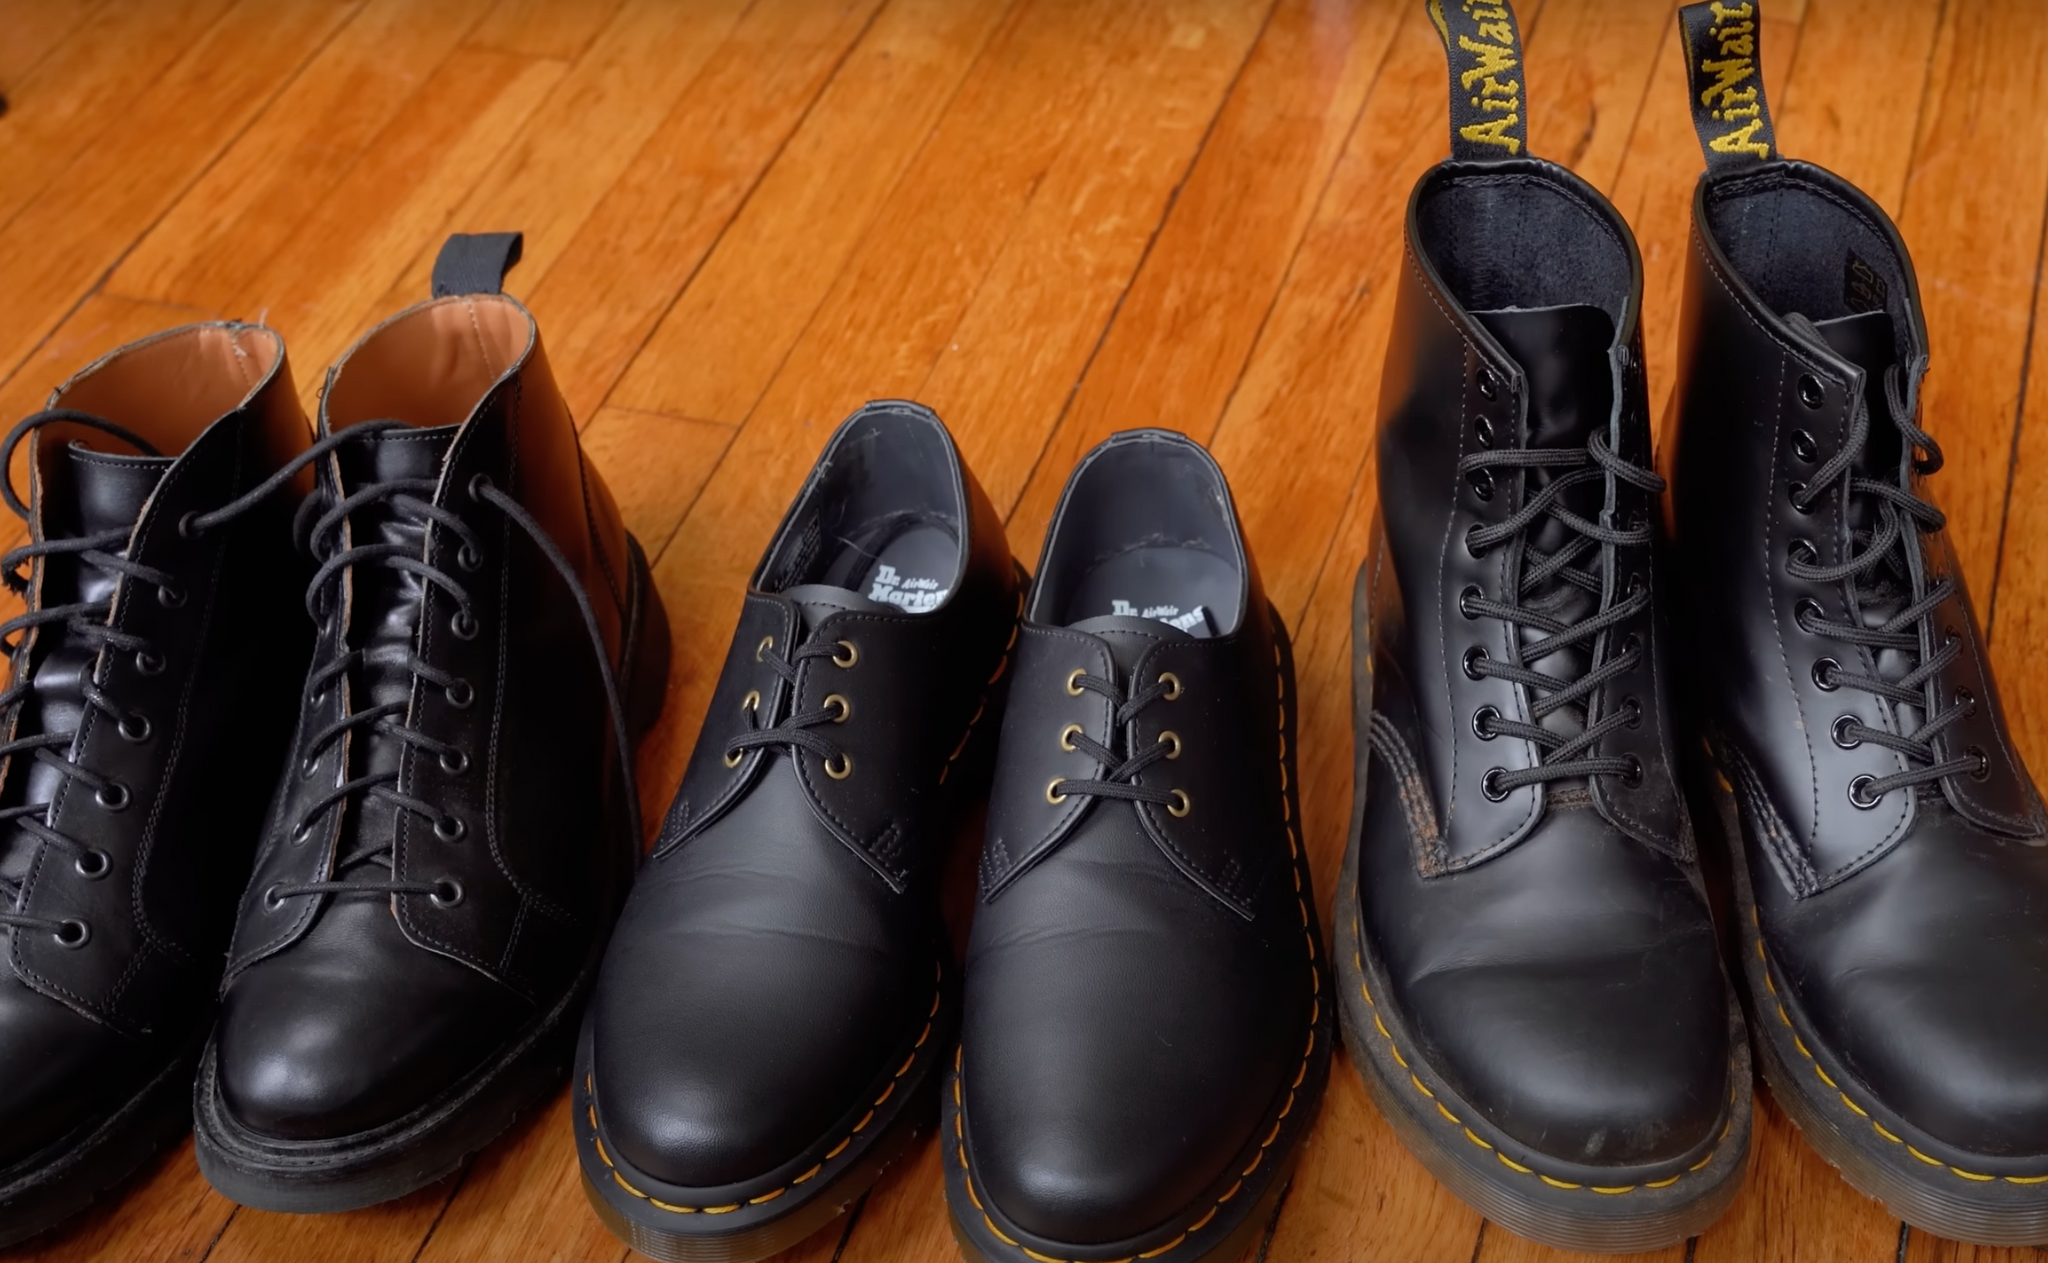 3 pairs of black leather shoes and boots, Solovair Monkey Boots, Dr. Martens 1461 Oxford Shoes, and Dr. Martens 1460 Boots